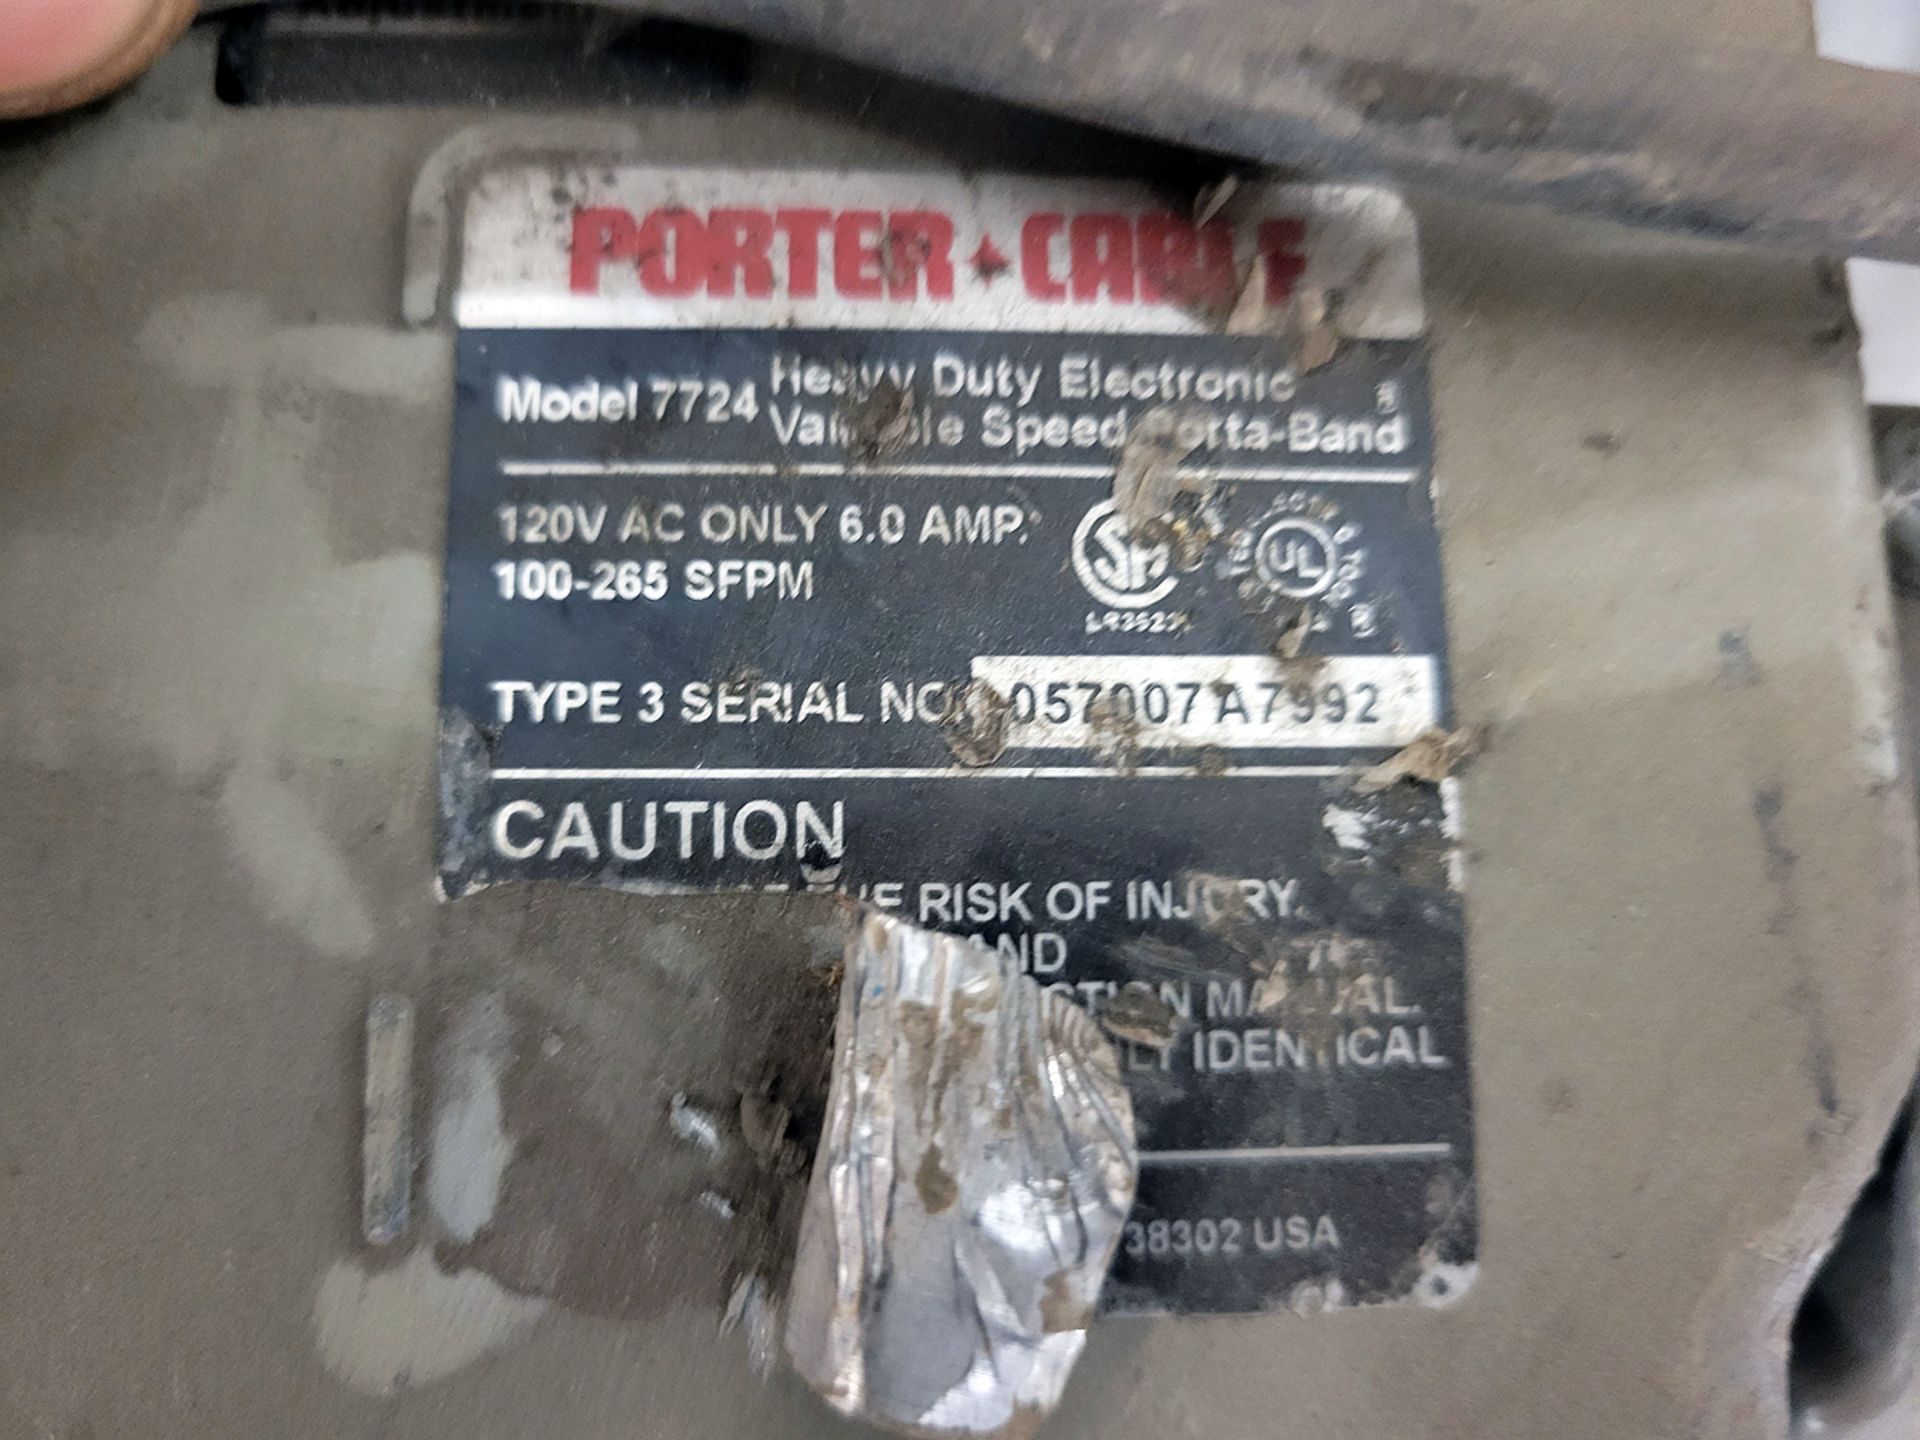 [Each] Porter-Cable Porta-Band Saw Model: 7724 - Image 2 of 2